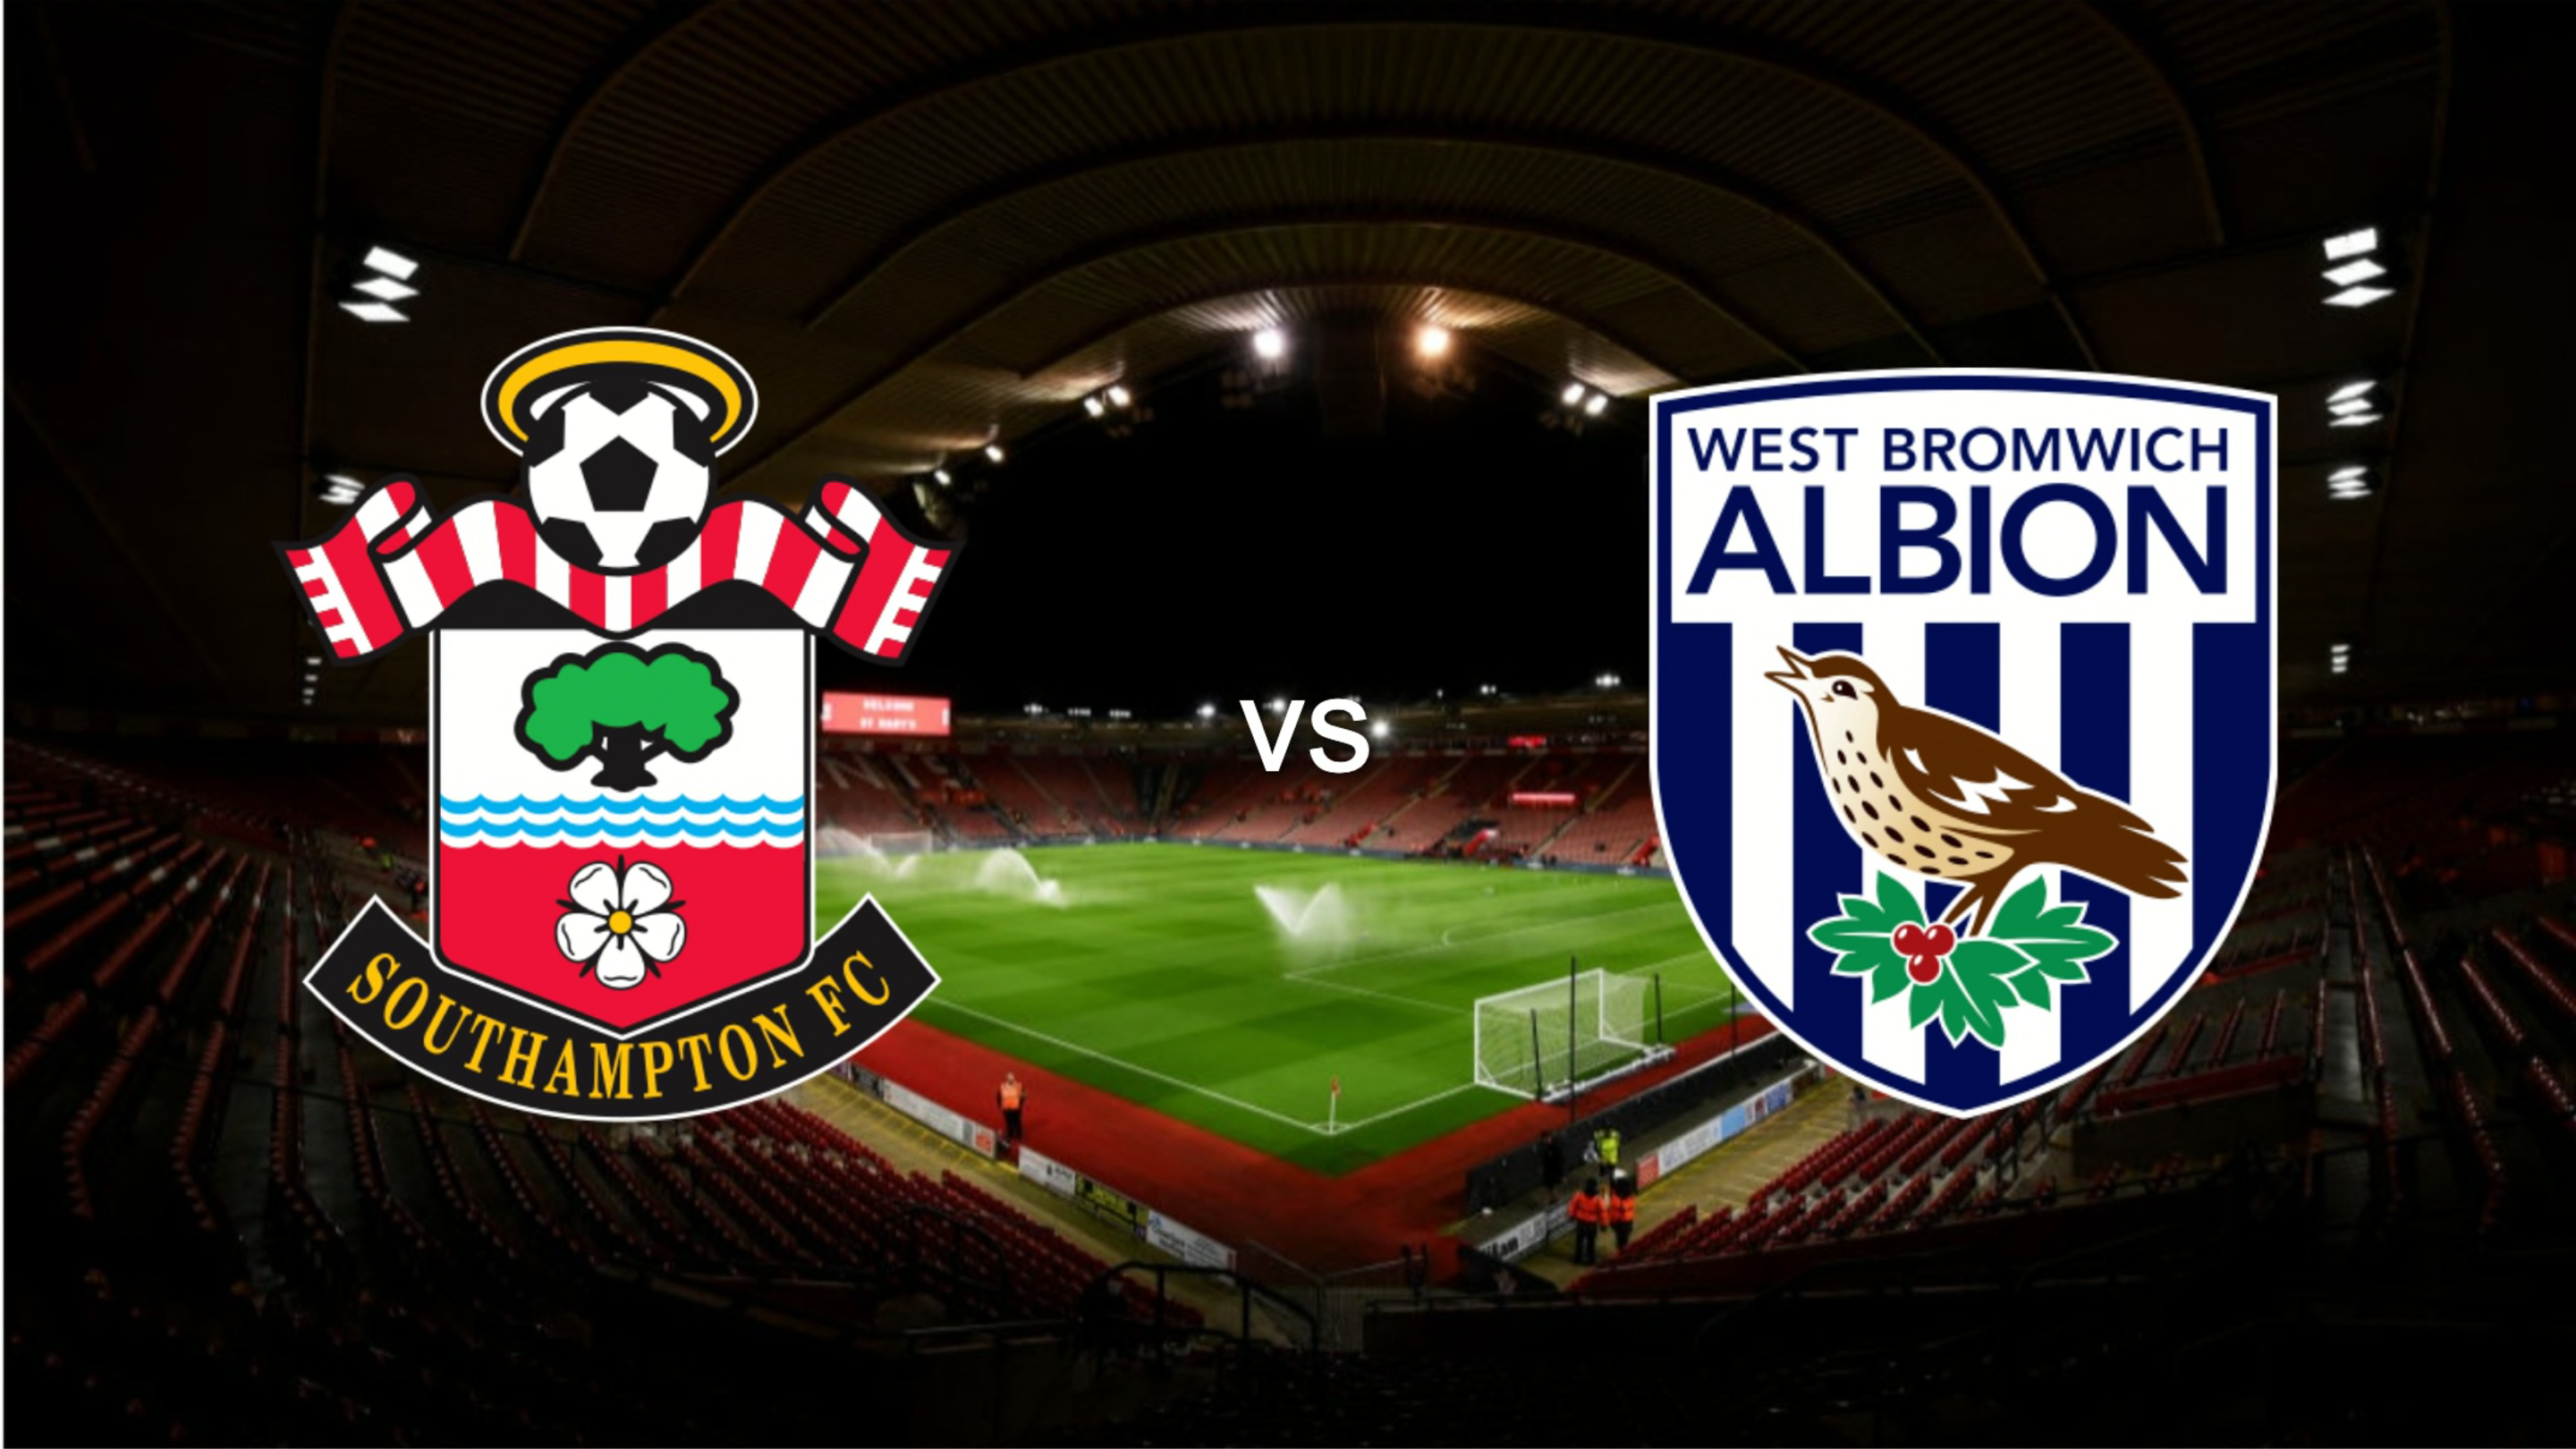 Southampton vs West Brom: Preview, predictions and lineups